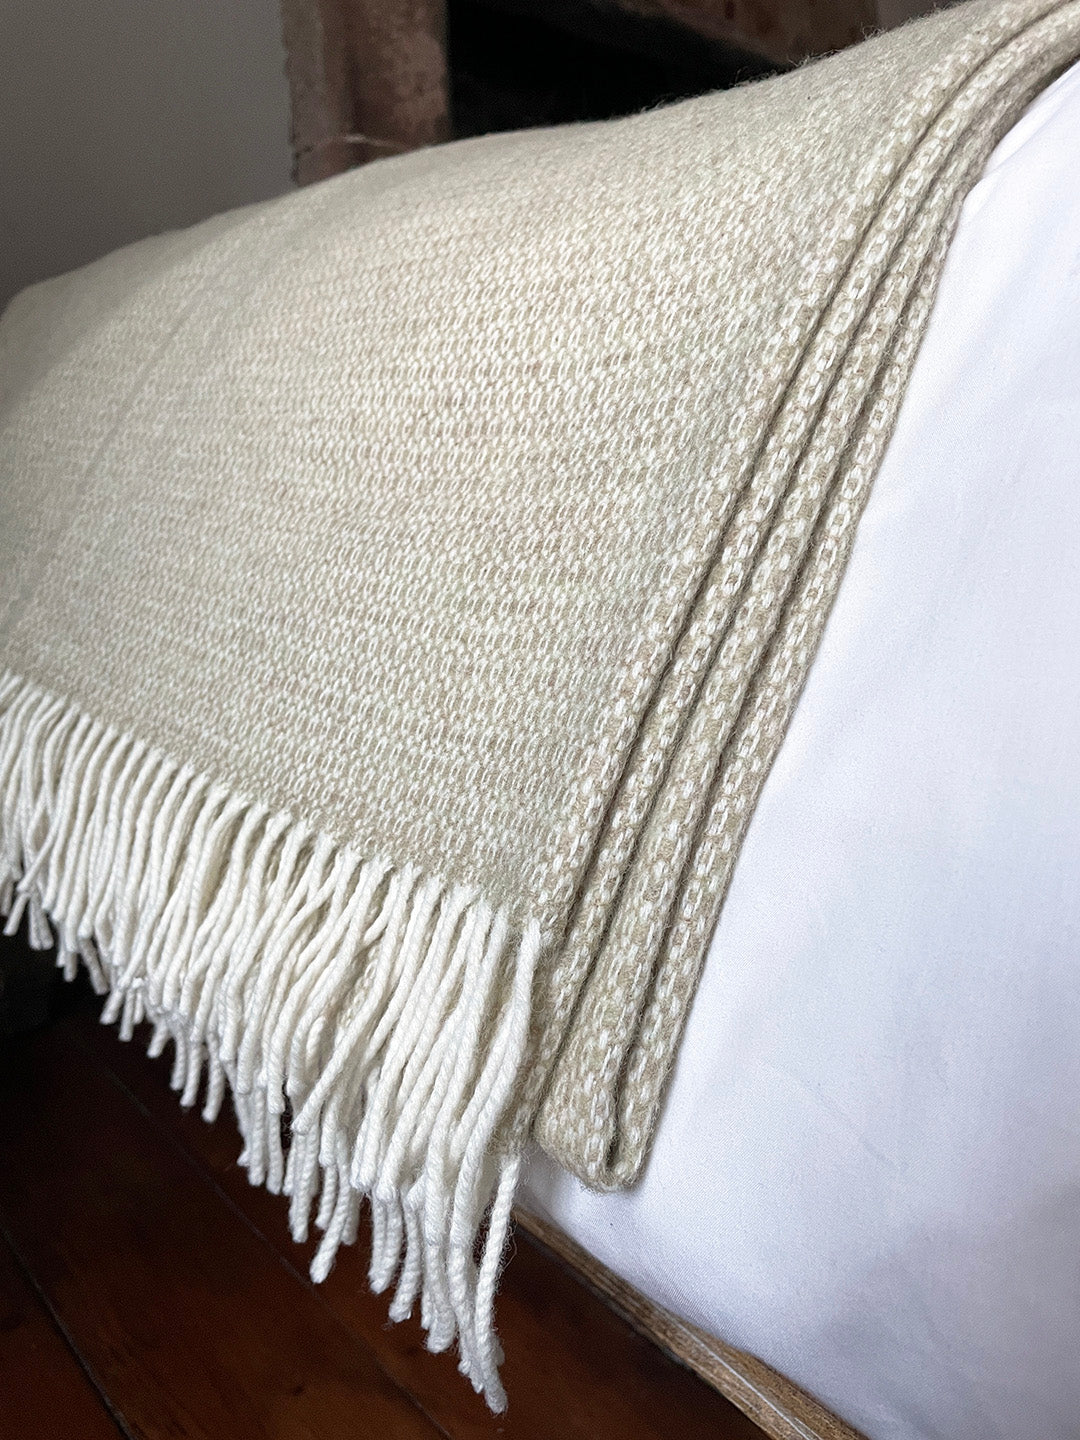 Generously sized pure merino lambswool throw woven in a delicate pattern in pale moss green and cream, shown draped over end of a bed.